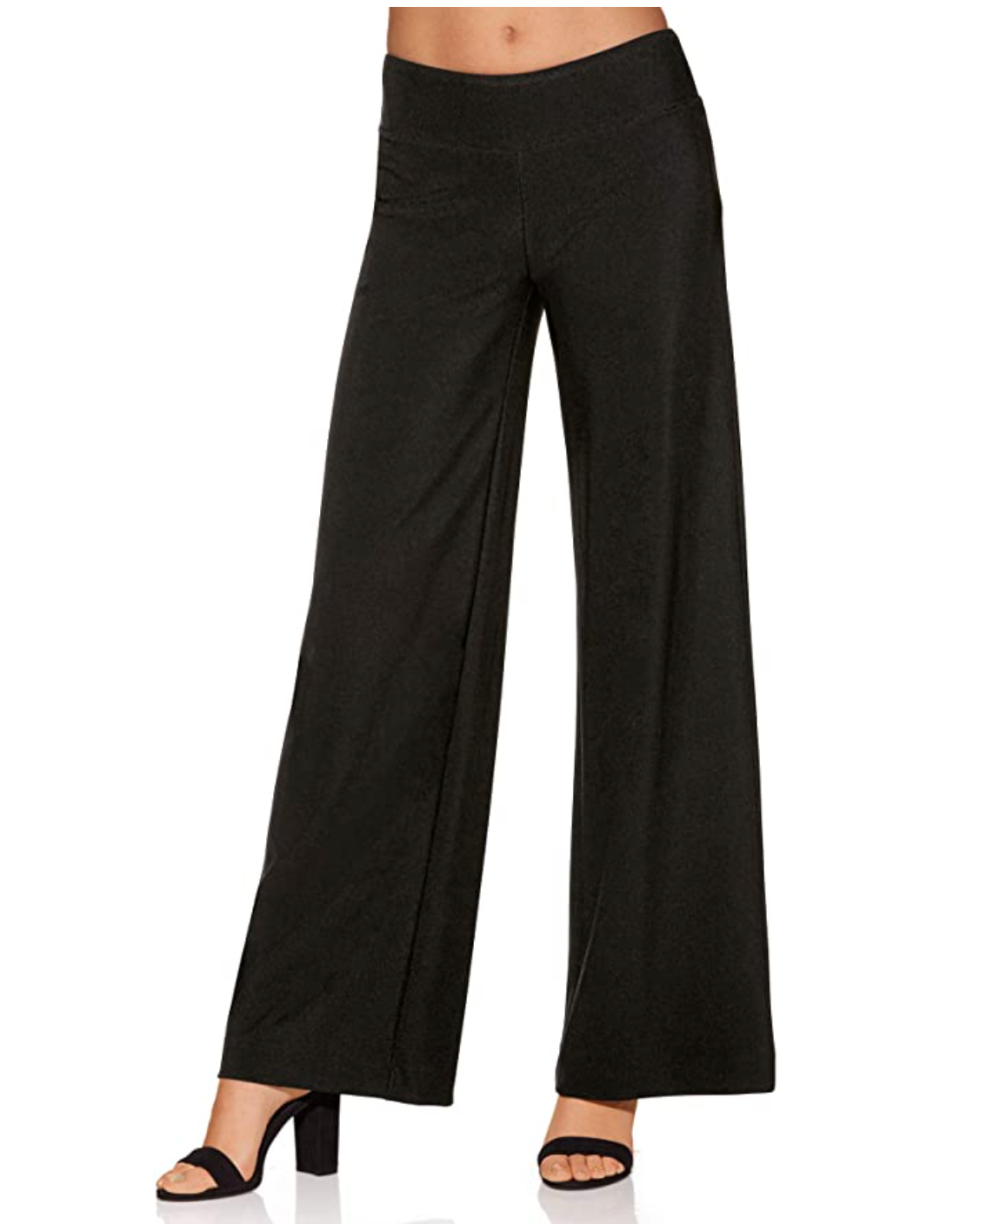 Boston Proper Women's Wrinkle-Resistant Solid Color Knit Palazzo Pant